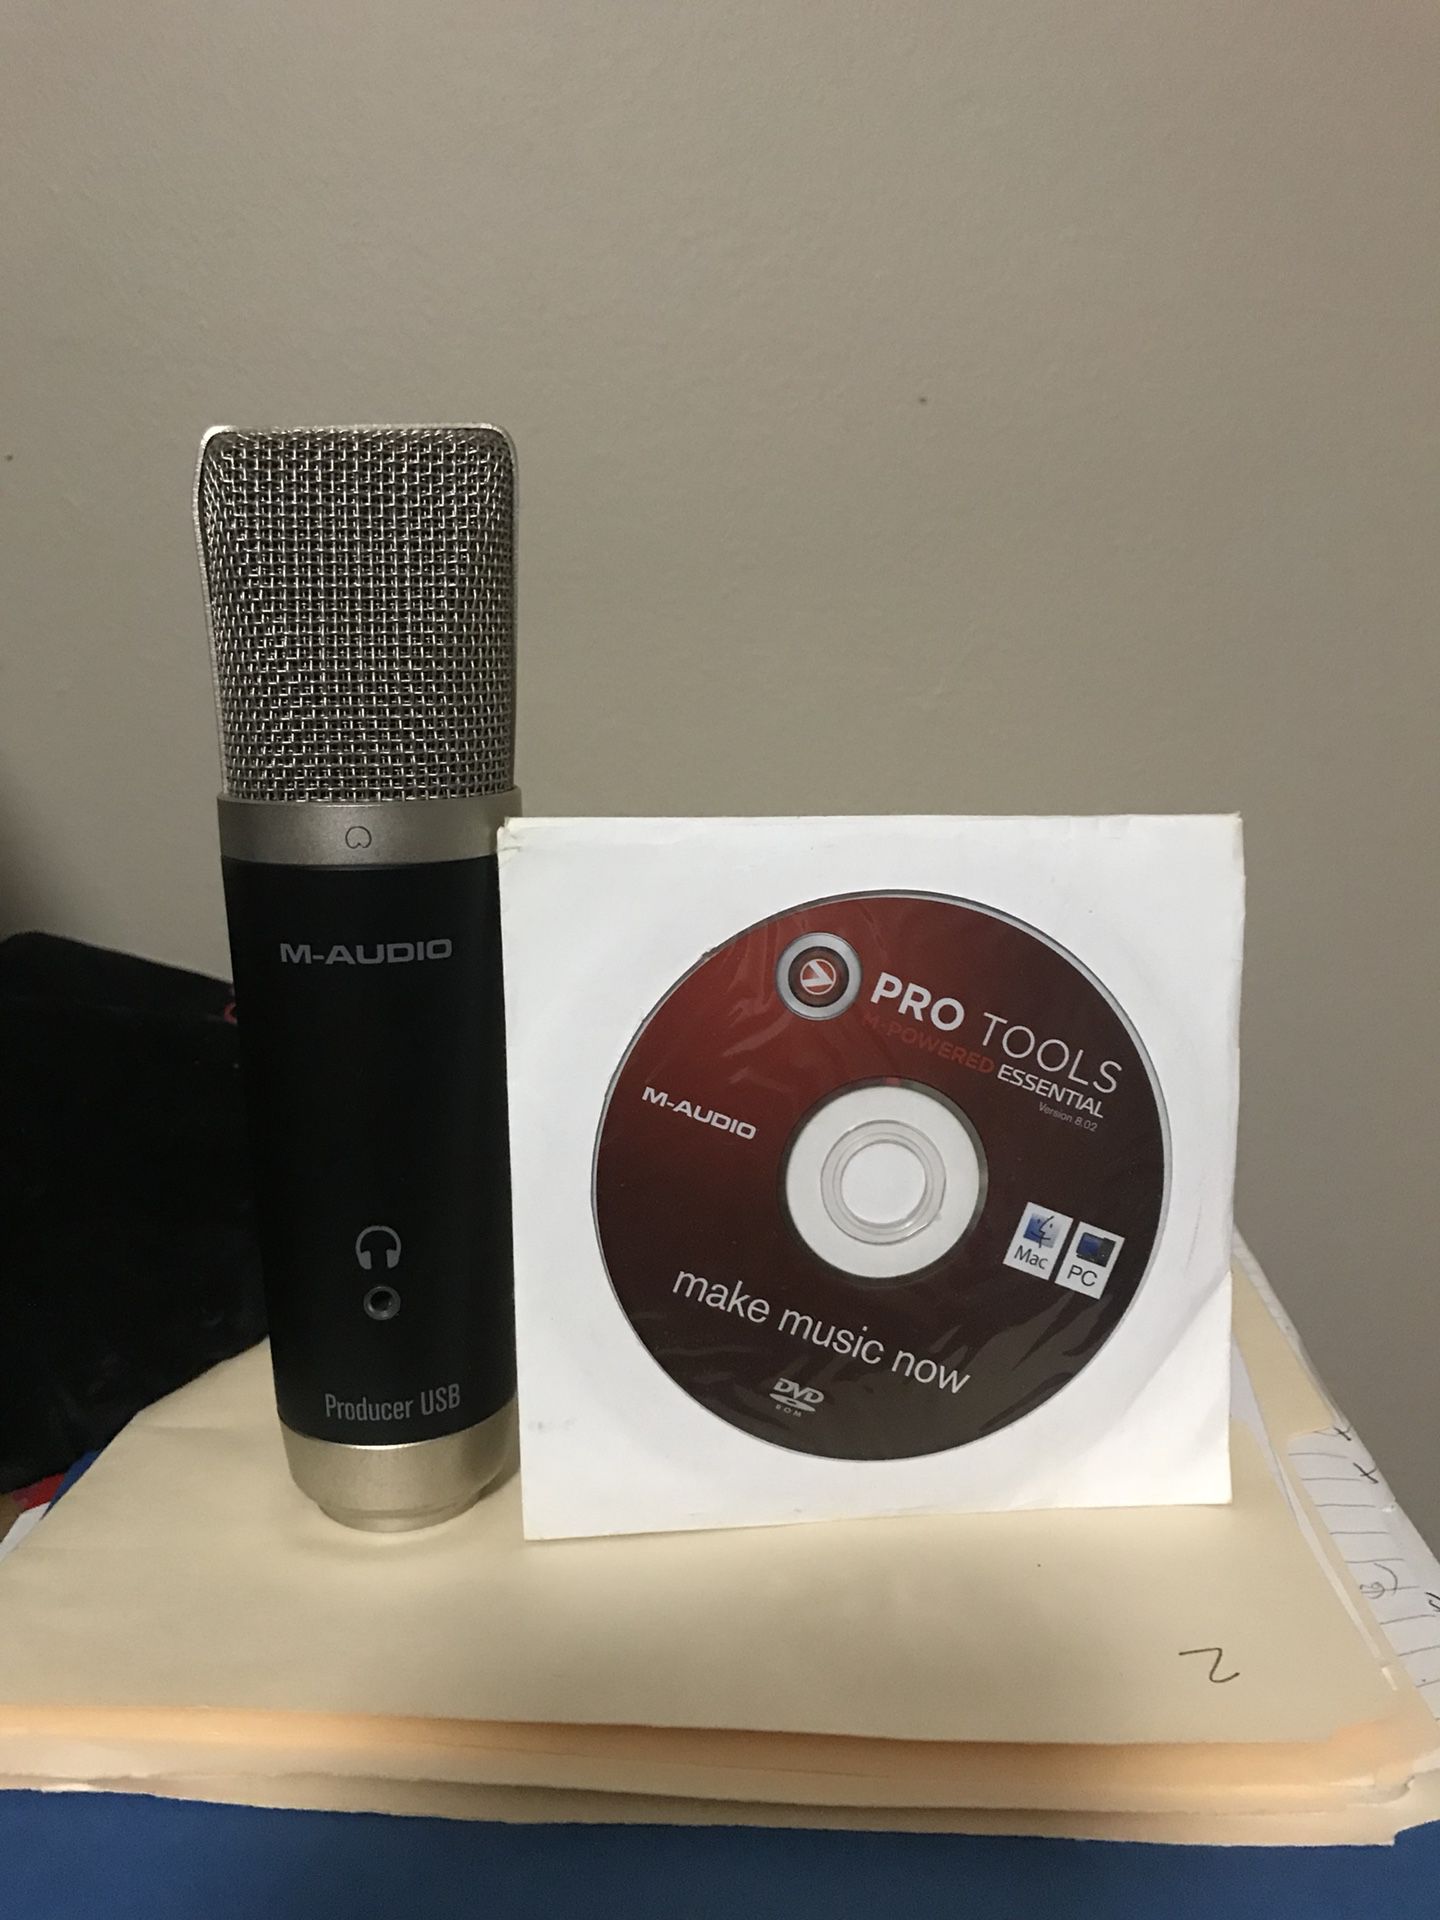 Pro Tools 8.02 and M-Audio Usb Mic included